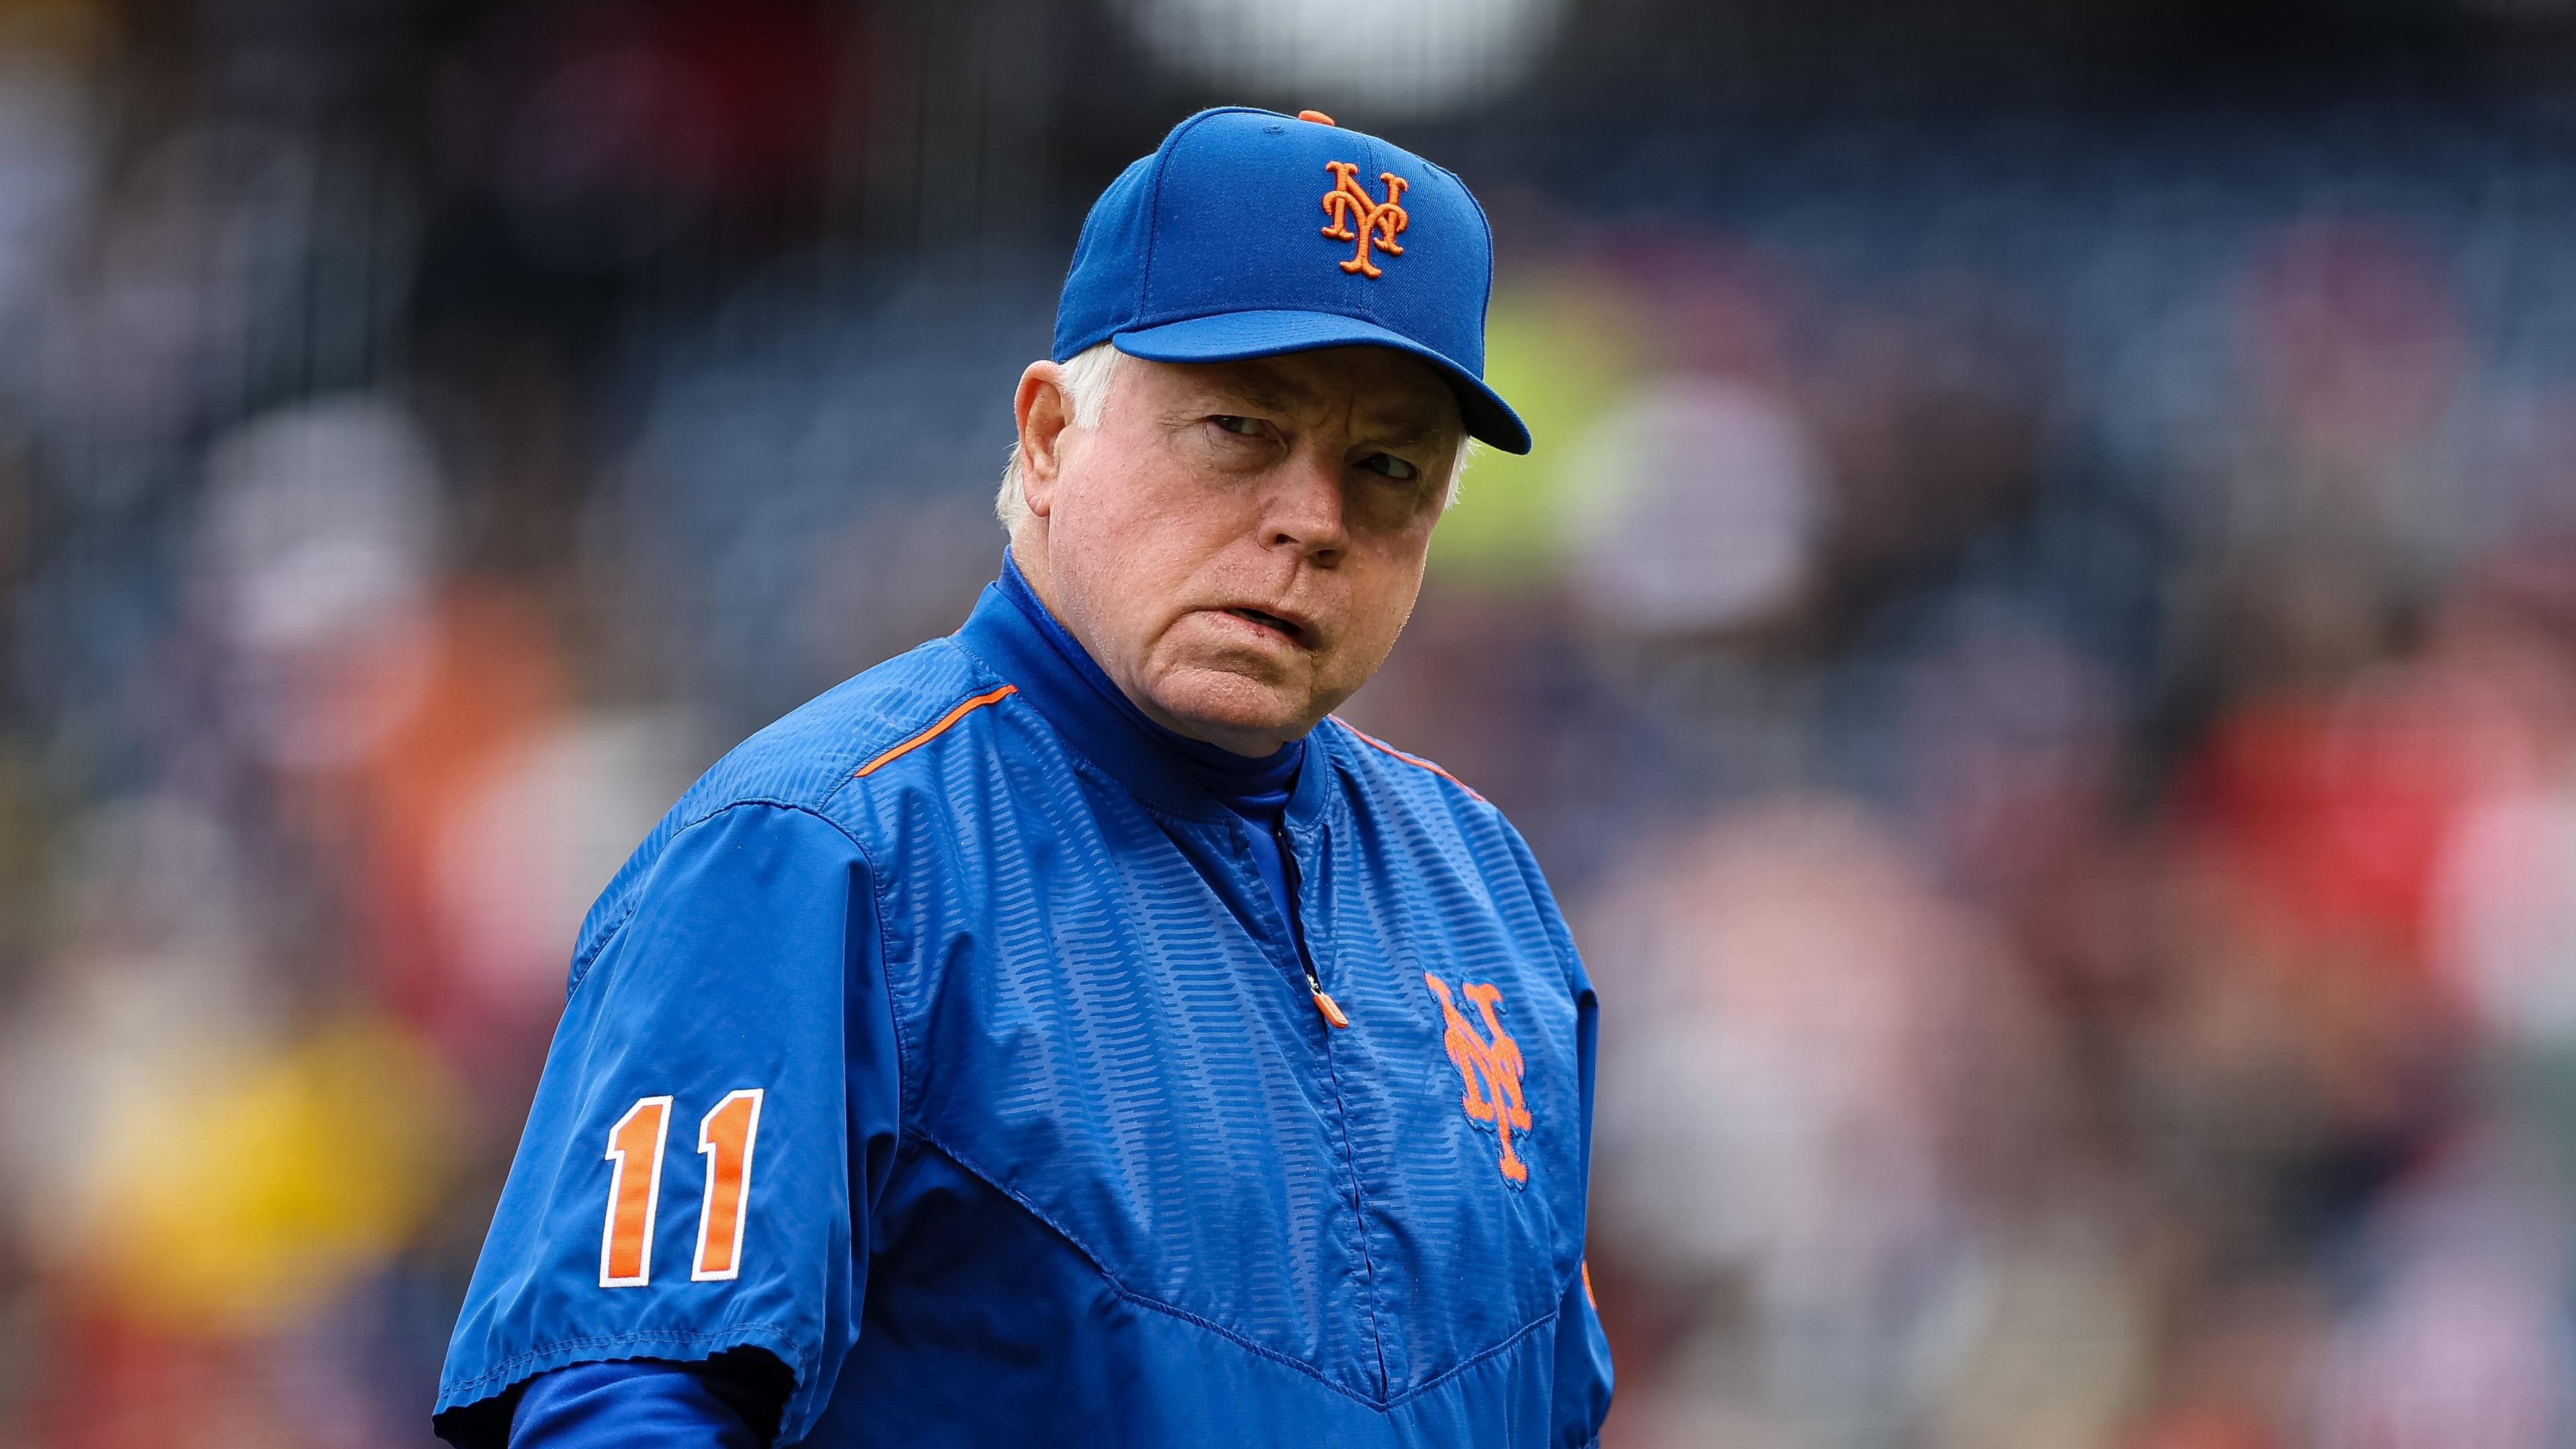 Apr 10, 2022; Washington, District of Columbia, USA; New York Mets manager Buck Showalter (11) looks on against the Washington Nationals during the sixth inning at Nationals Park. Mandatory Credit: Scott Taetsch-USA TODAY Sports / Scott Taetsch-USA TODAY Sports